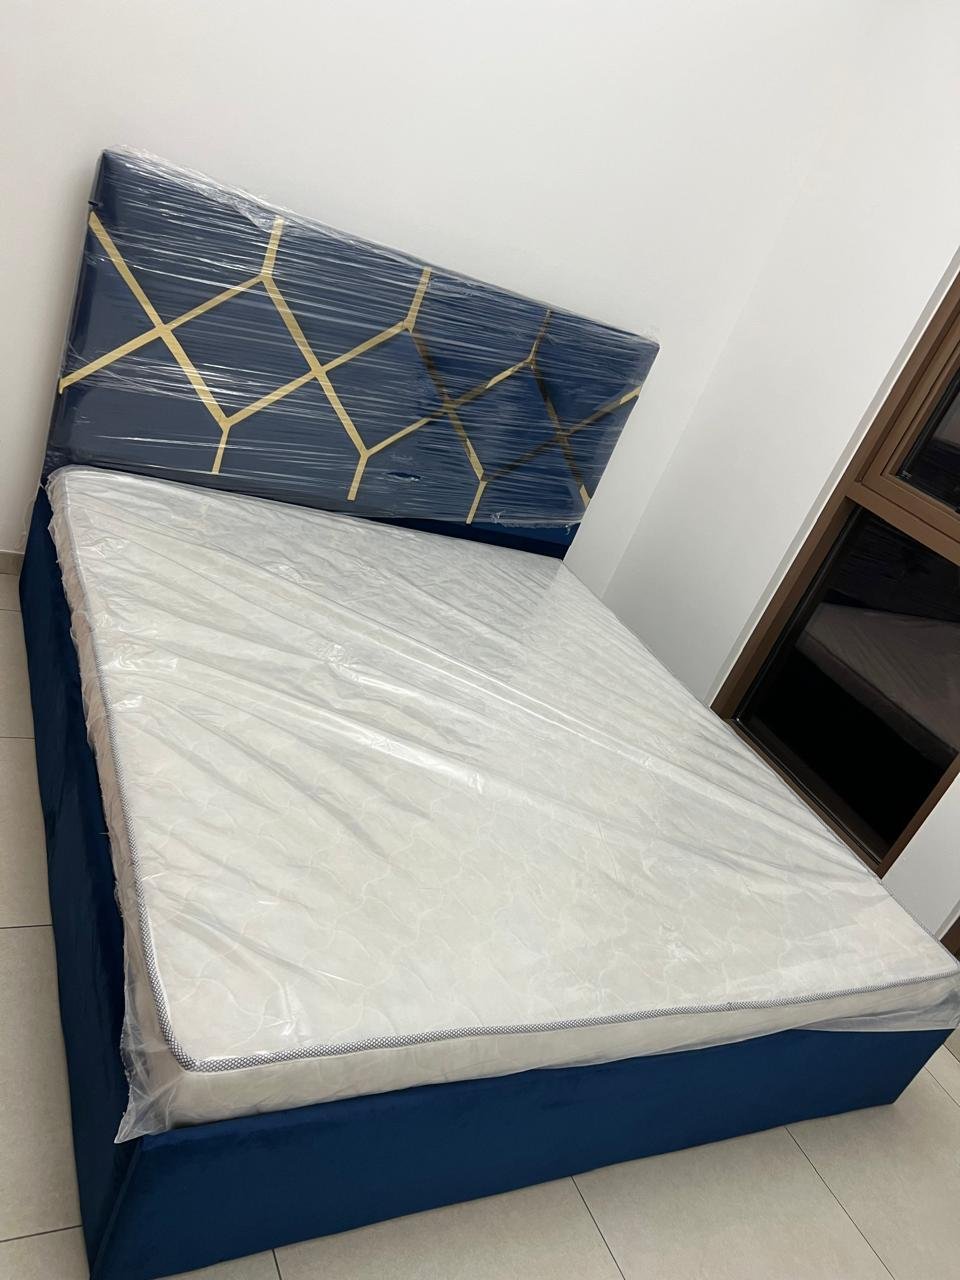 Bed For Sale In Dubai With Mattress